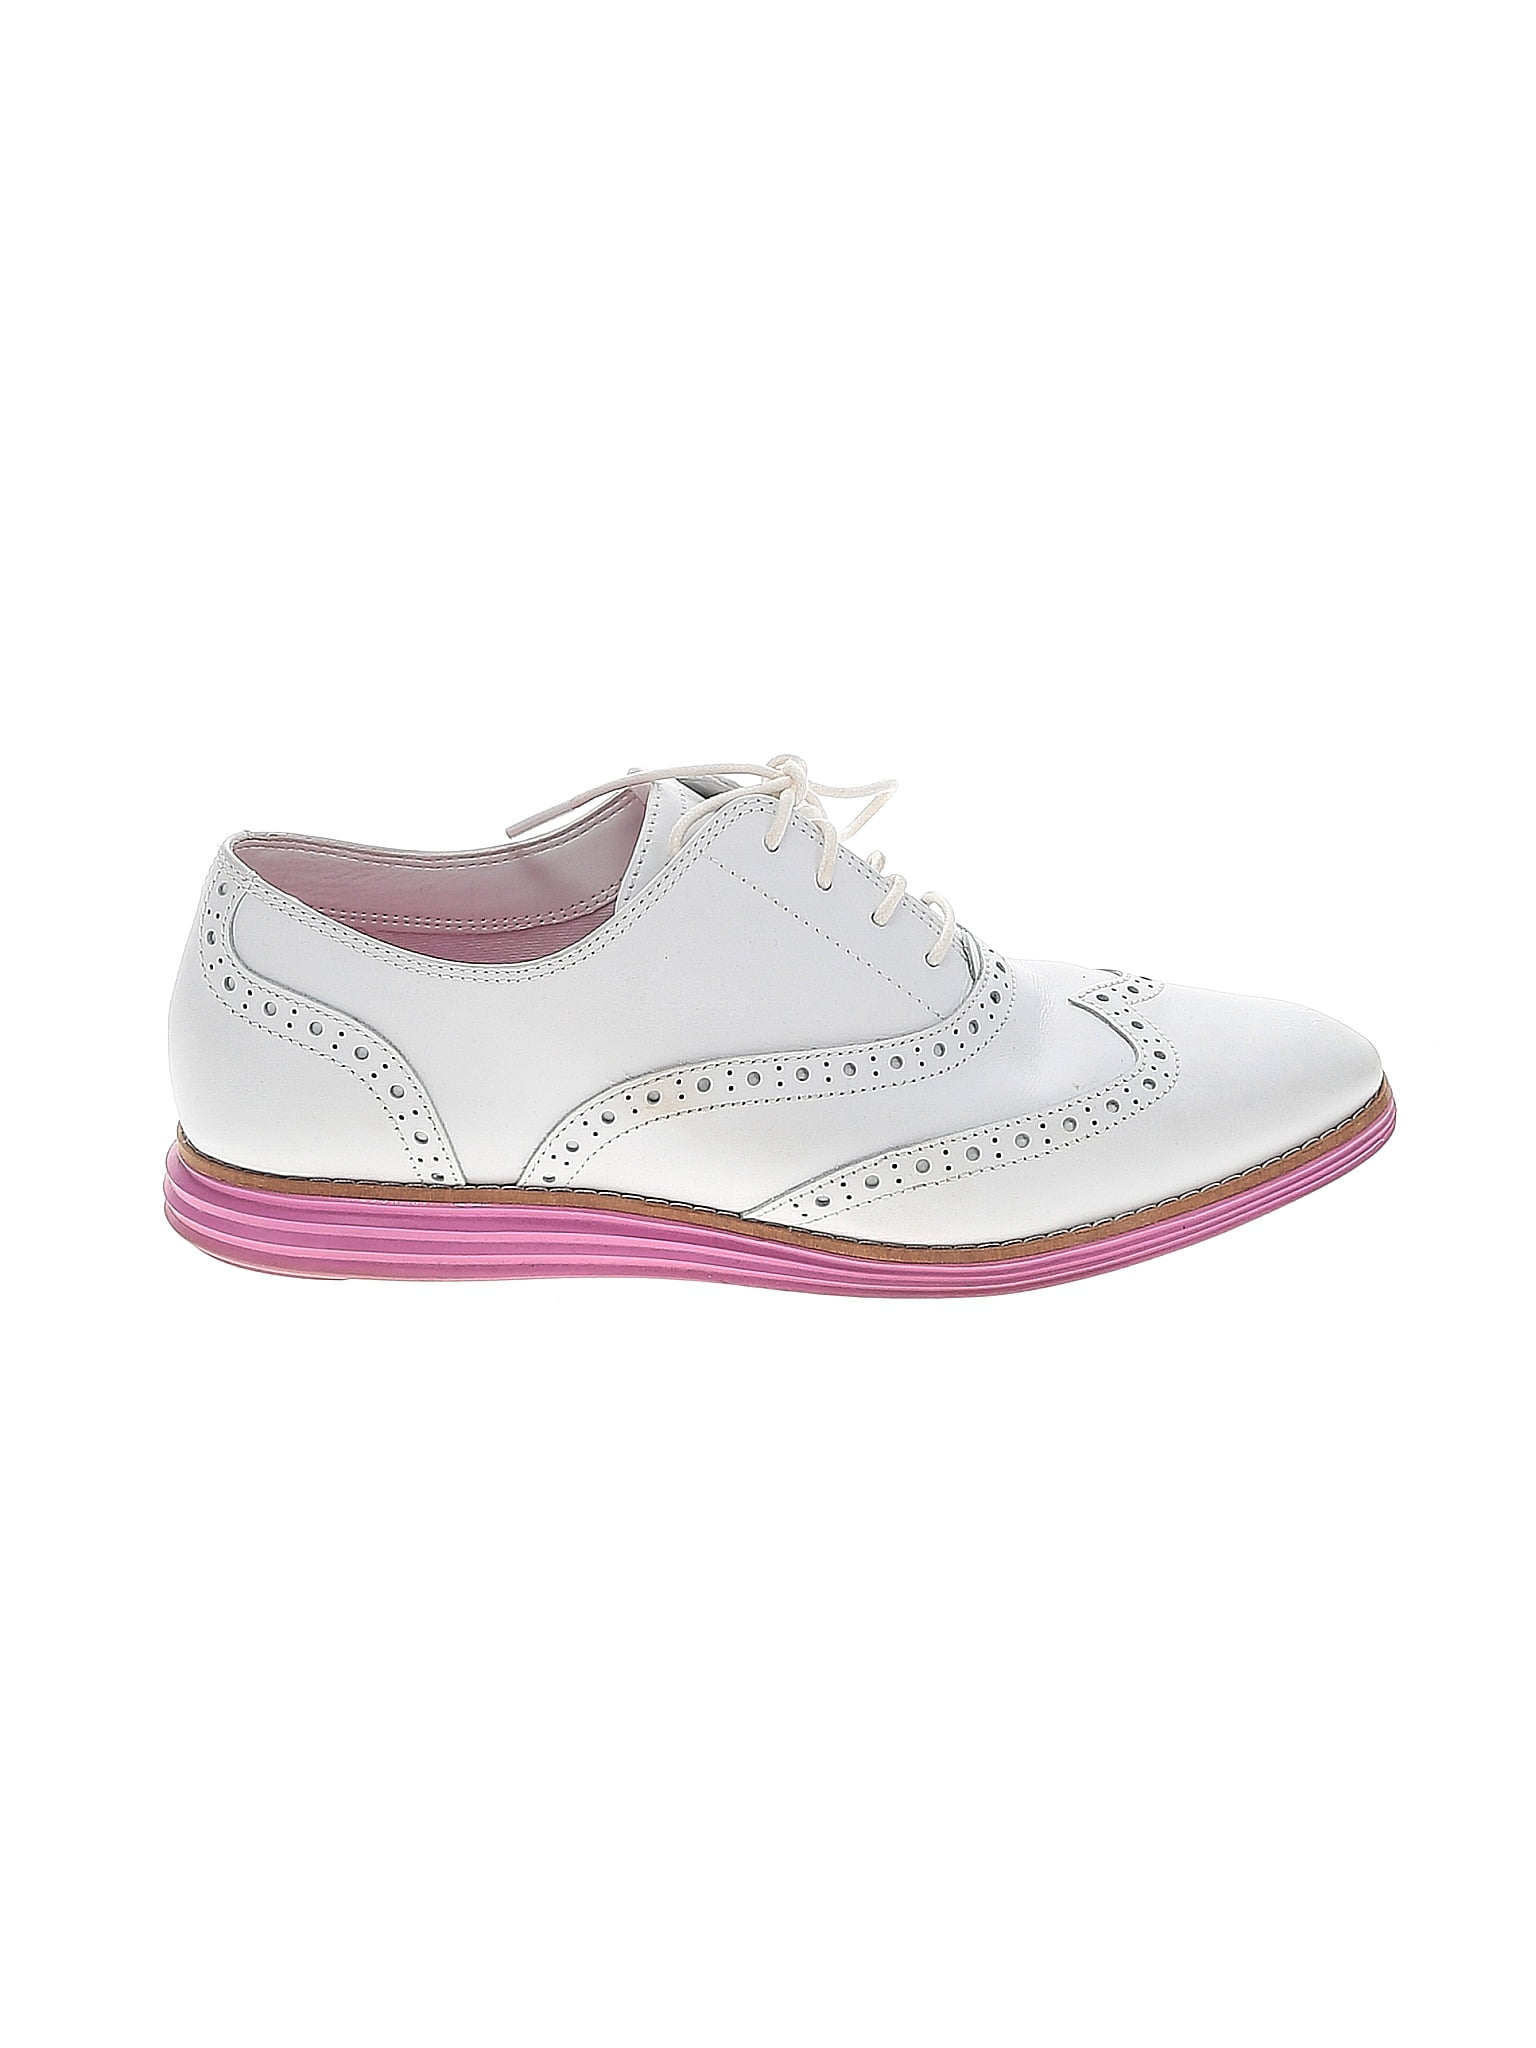 Cole Haan White Flats Size 9 - 69% off | thredUP